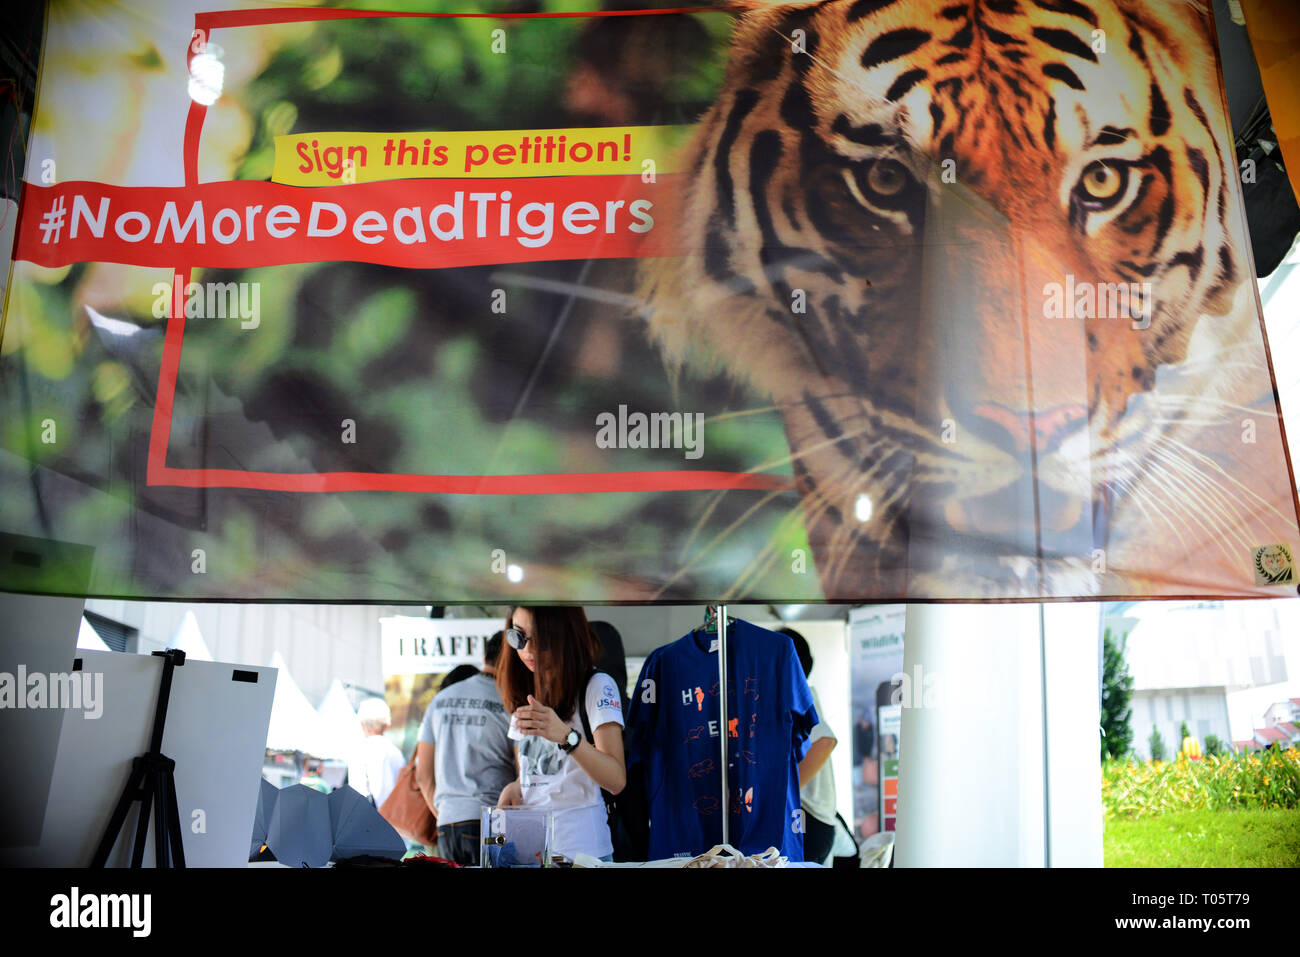 (190317) -- KUALA LUMPUR, March 17, 2019 (Xinhua) -- A poster calling for the protection for tigers is seen during the Save Our Malayan Tiger campaign, as part of events to mark the International World Wildlife Day, in Kuala Lumpur, Malaysia, March 17, 2019. Malaysia's government announced the launching of a campaign on Sunday to provide greater protection for the country's tiger amid an alarming increase of poaching. The Malayan tiger, a subspecies of the big cat lives in Southern Thailand and Malaysia, had seen its numbers dwindle to an estimated 250 in the wild in Malaysia due to poaching Stock Photo